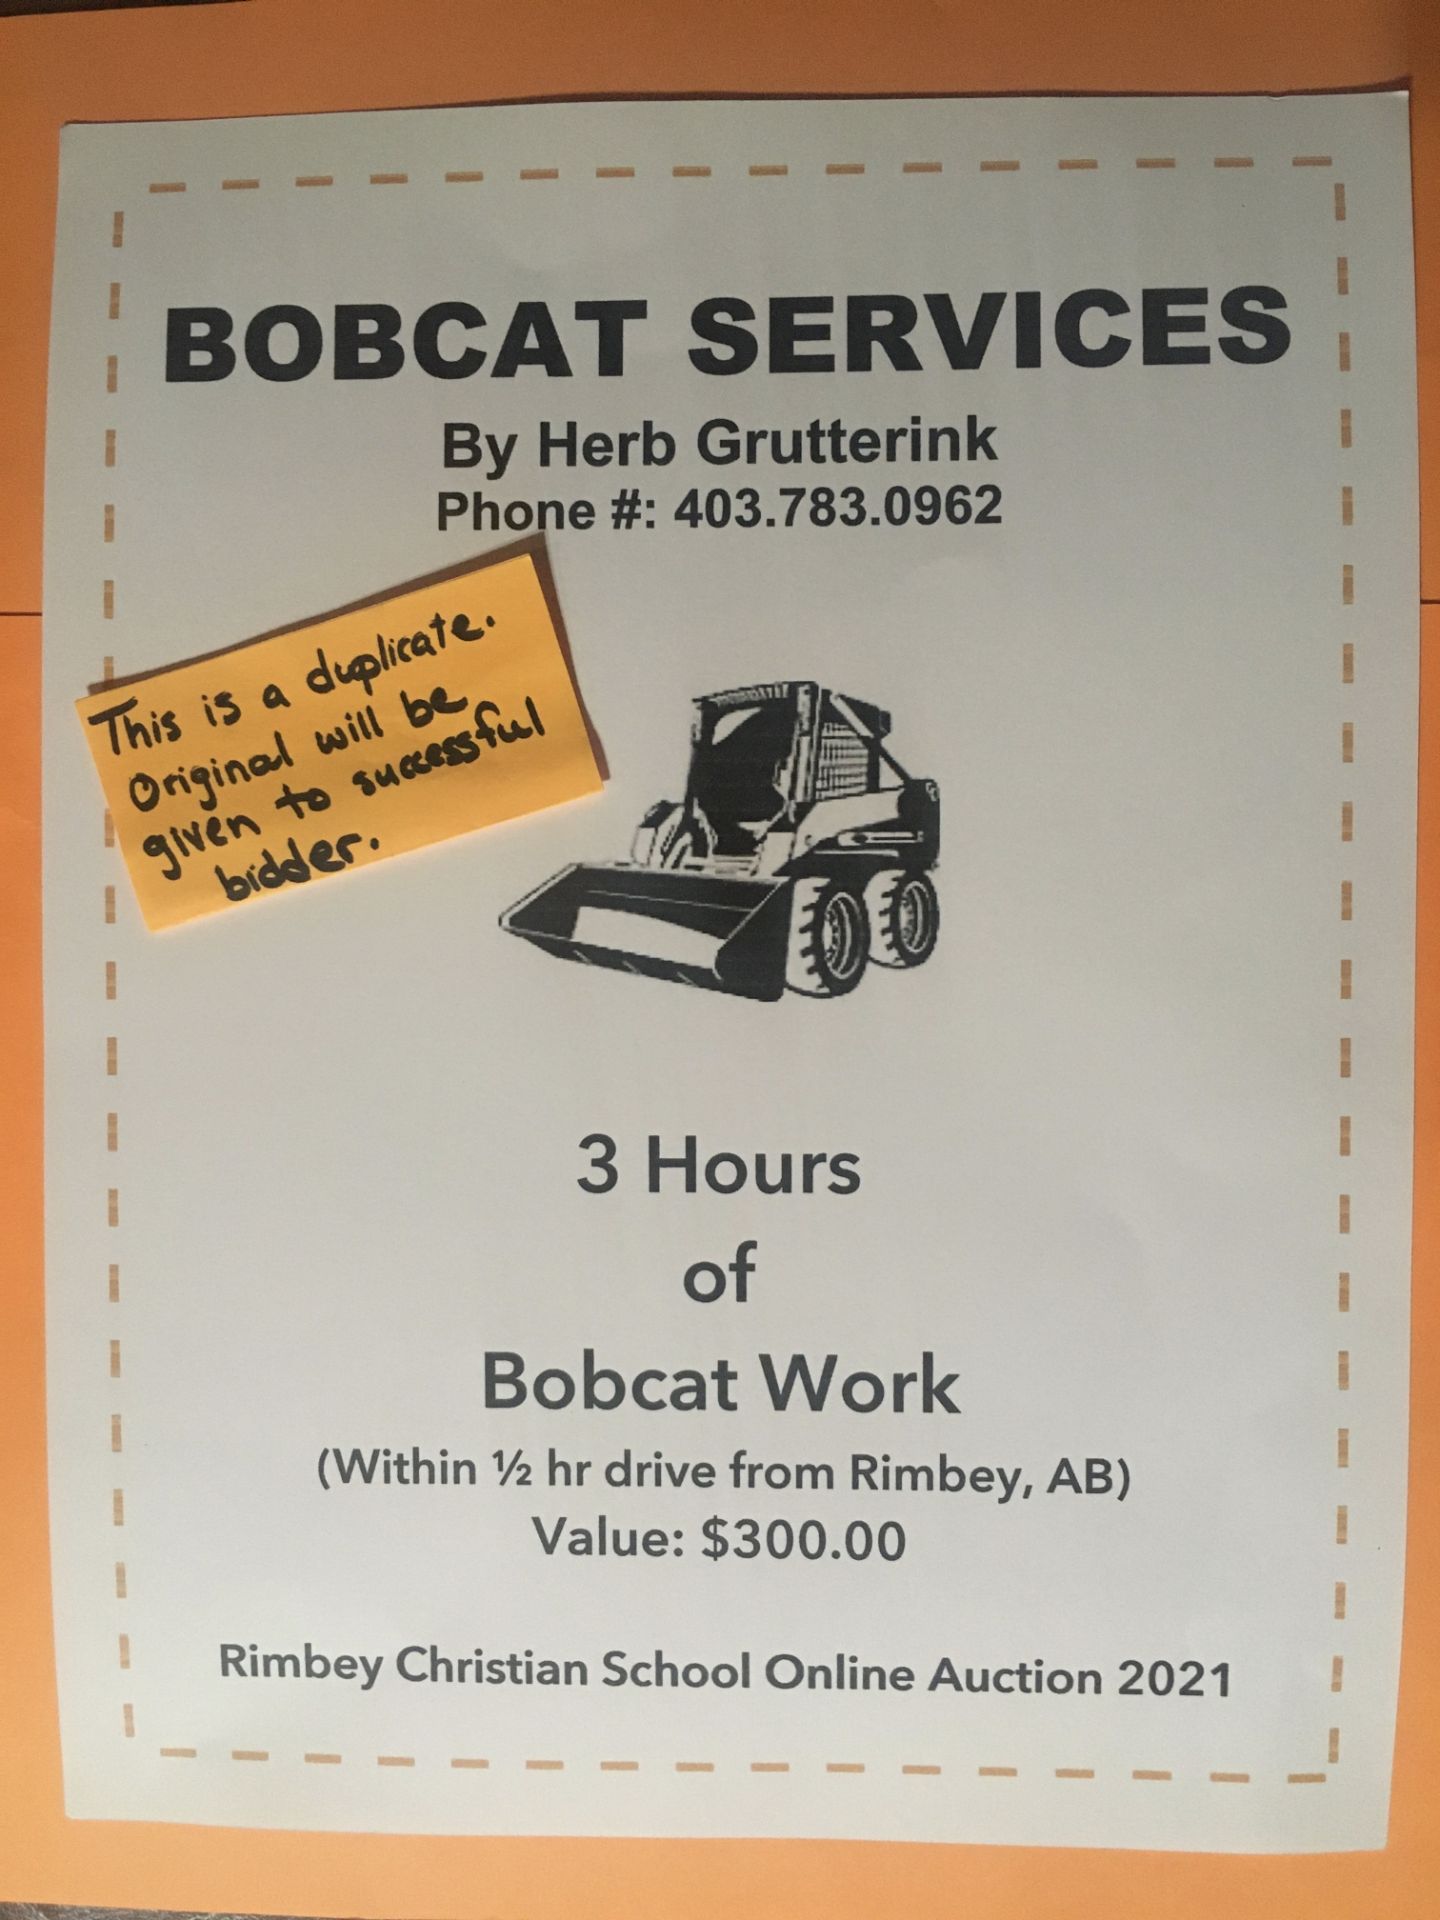 GRUTTERINK BOBCAT SERVICES 3 Hours of Bobcat Work by Herb Grutterink. Needs to be within 1/2 drive